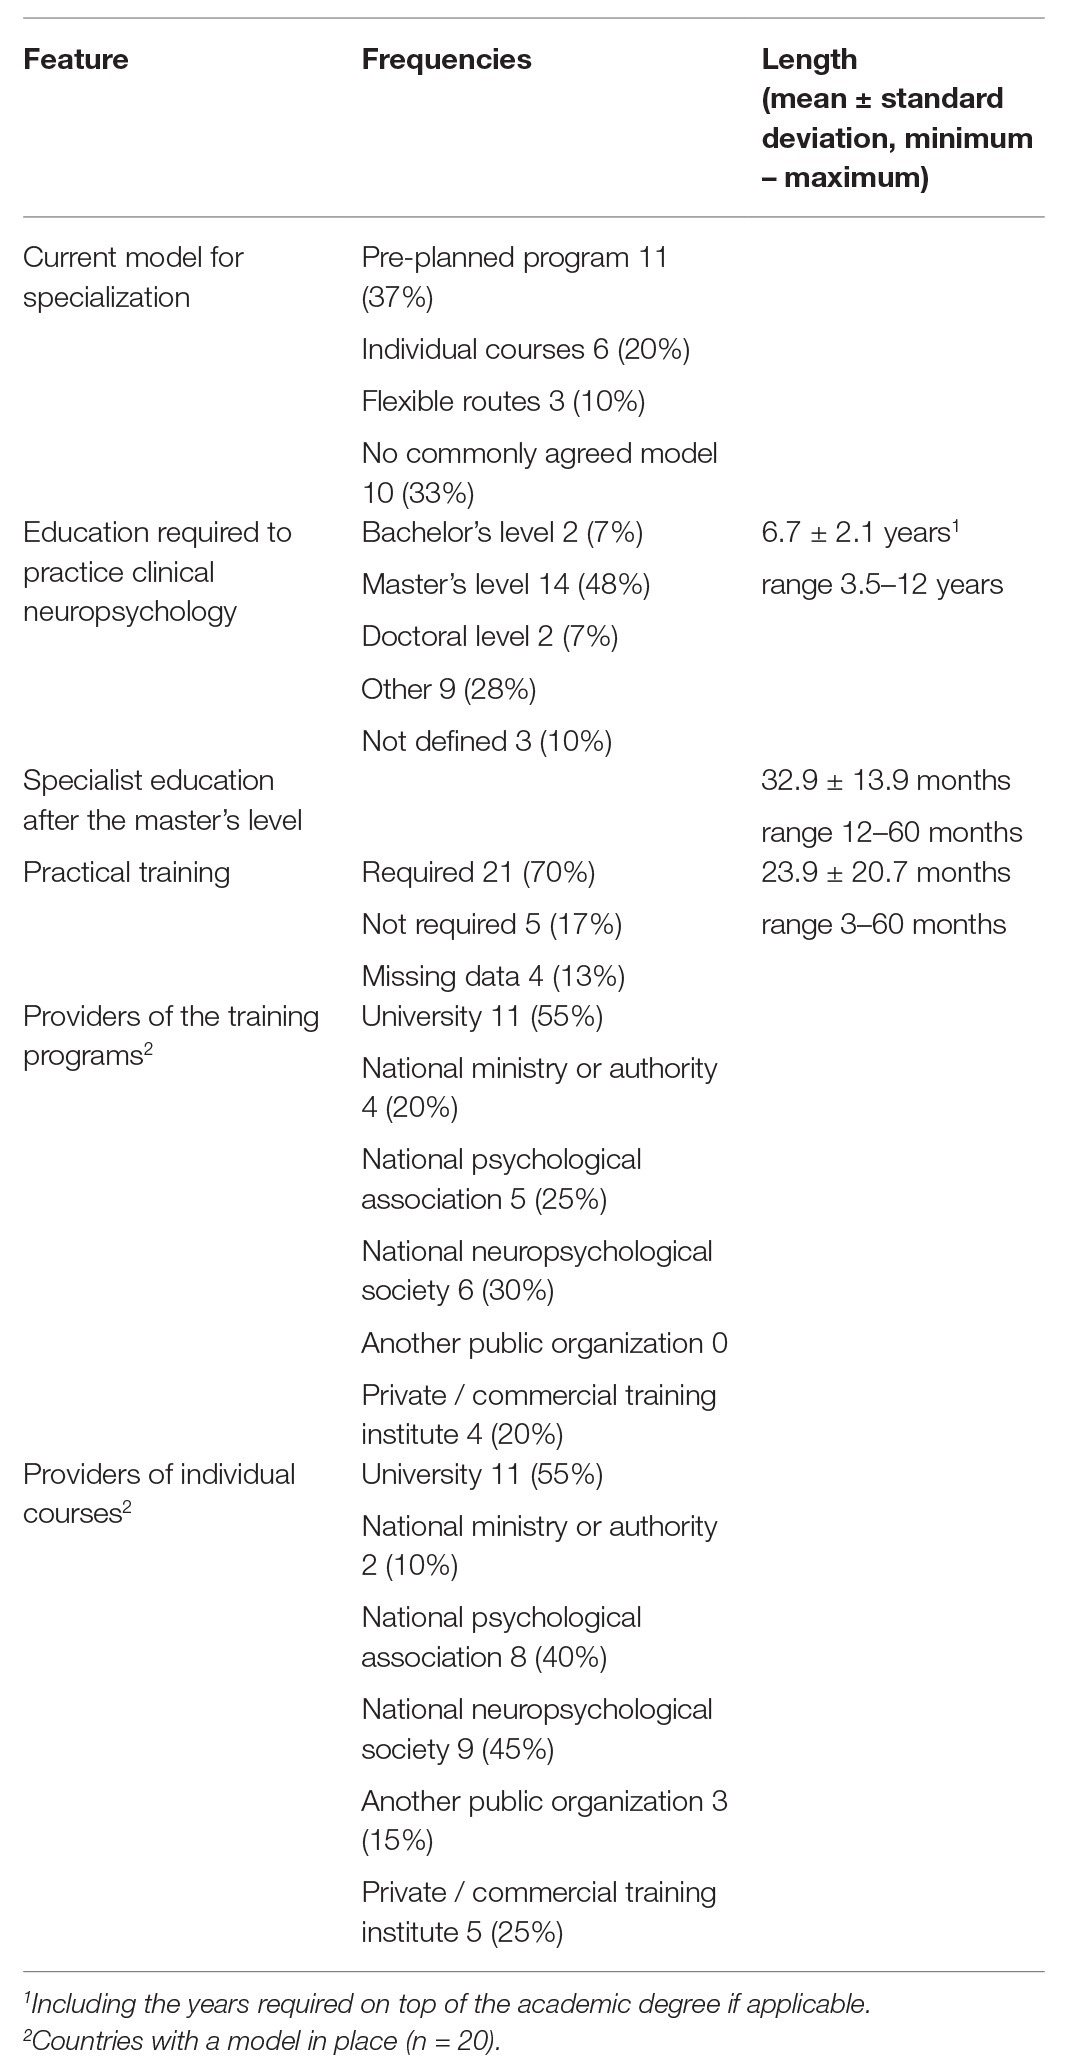 Frontiers  Neuropsychological Assessments of Patients With